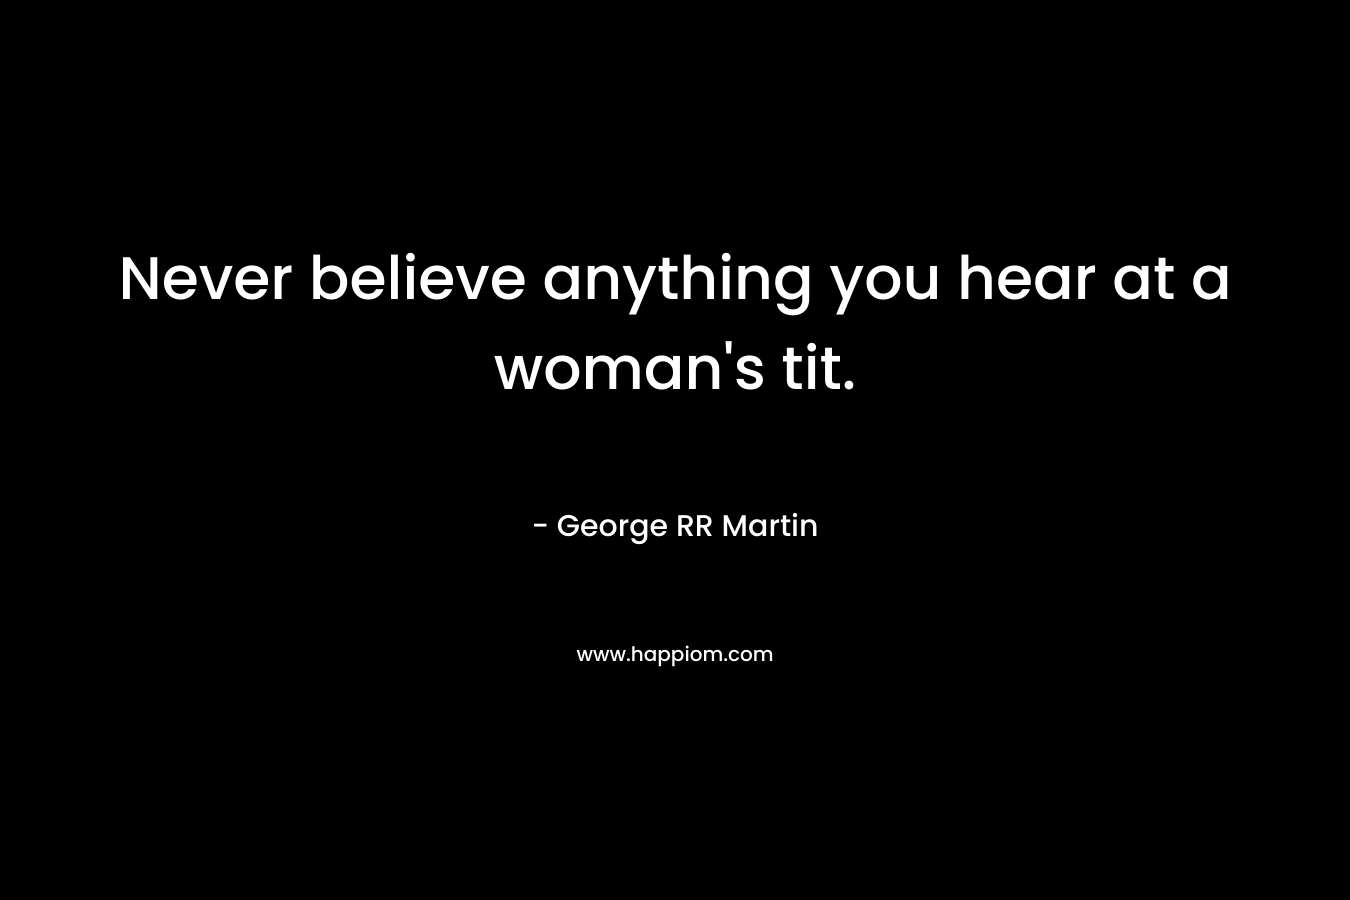 Never believe anything you hear at a woman’s tit. – George RR Martin